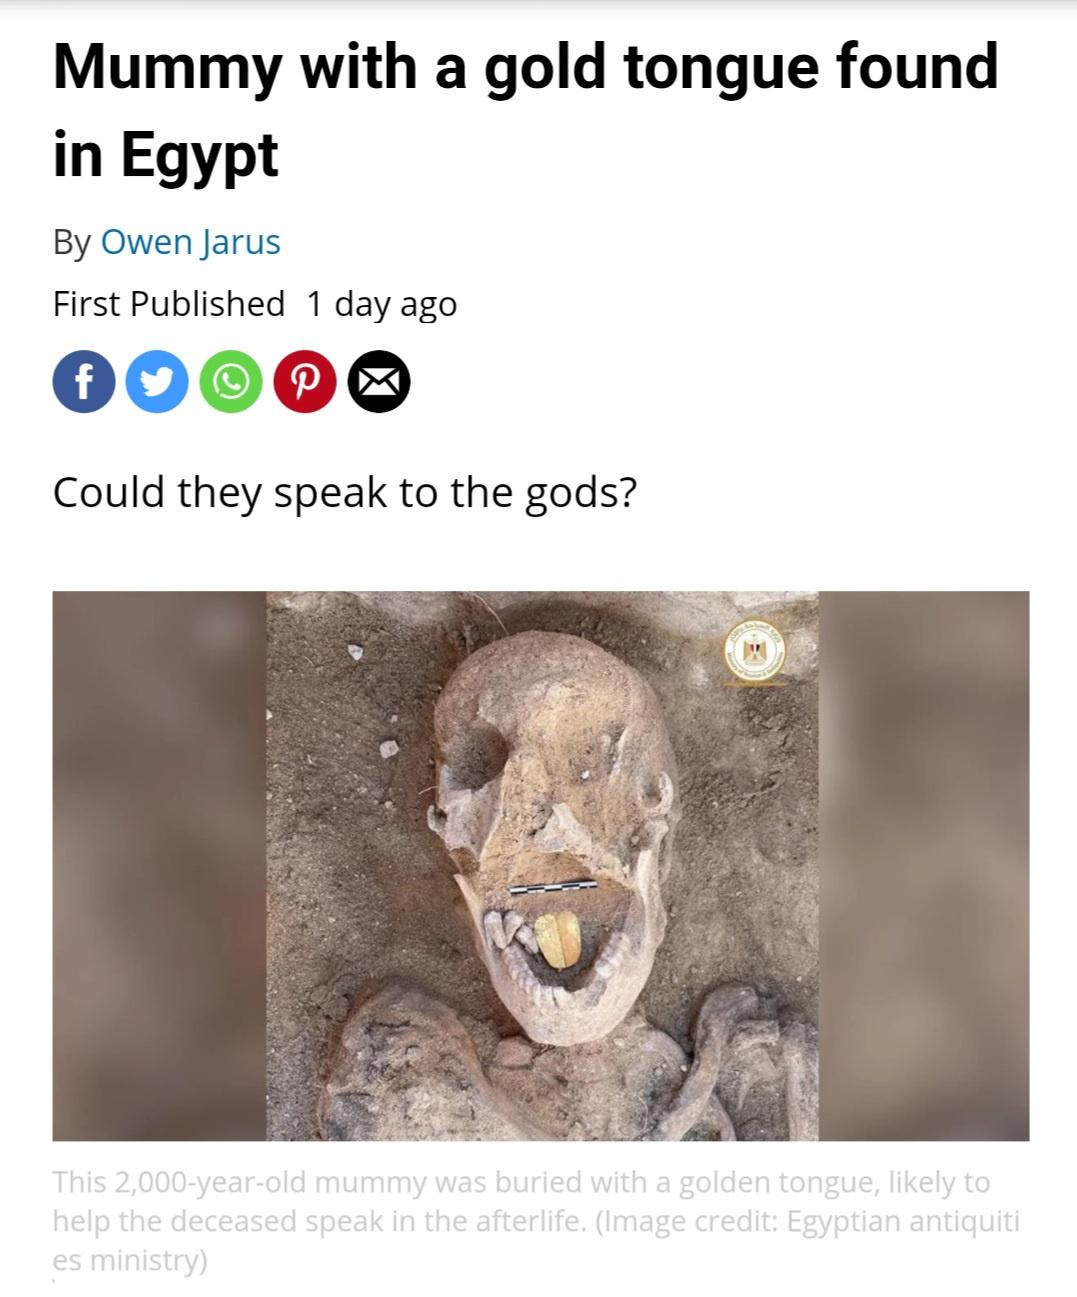 Mummy - Mummy with a gold tongue found in Egypt By Owen Jarus First Published 1 day ago f P Could they speak to the gods? This 2,000yearold mummy was buried with a golden tongue, ly to help the deceased speak in the afterlife. Image credit Egyptian antiqu